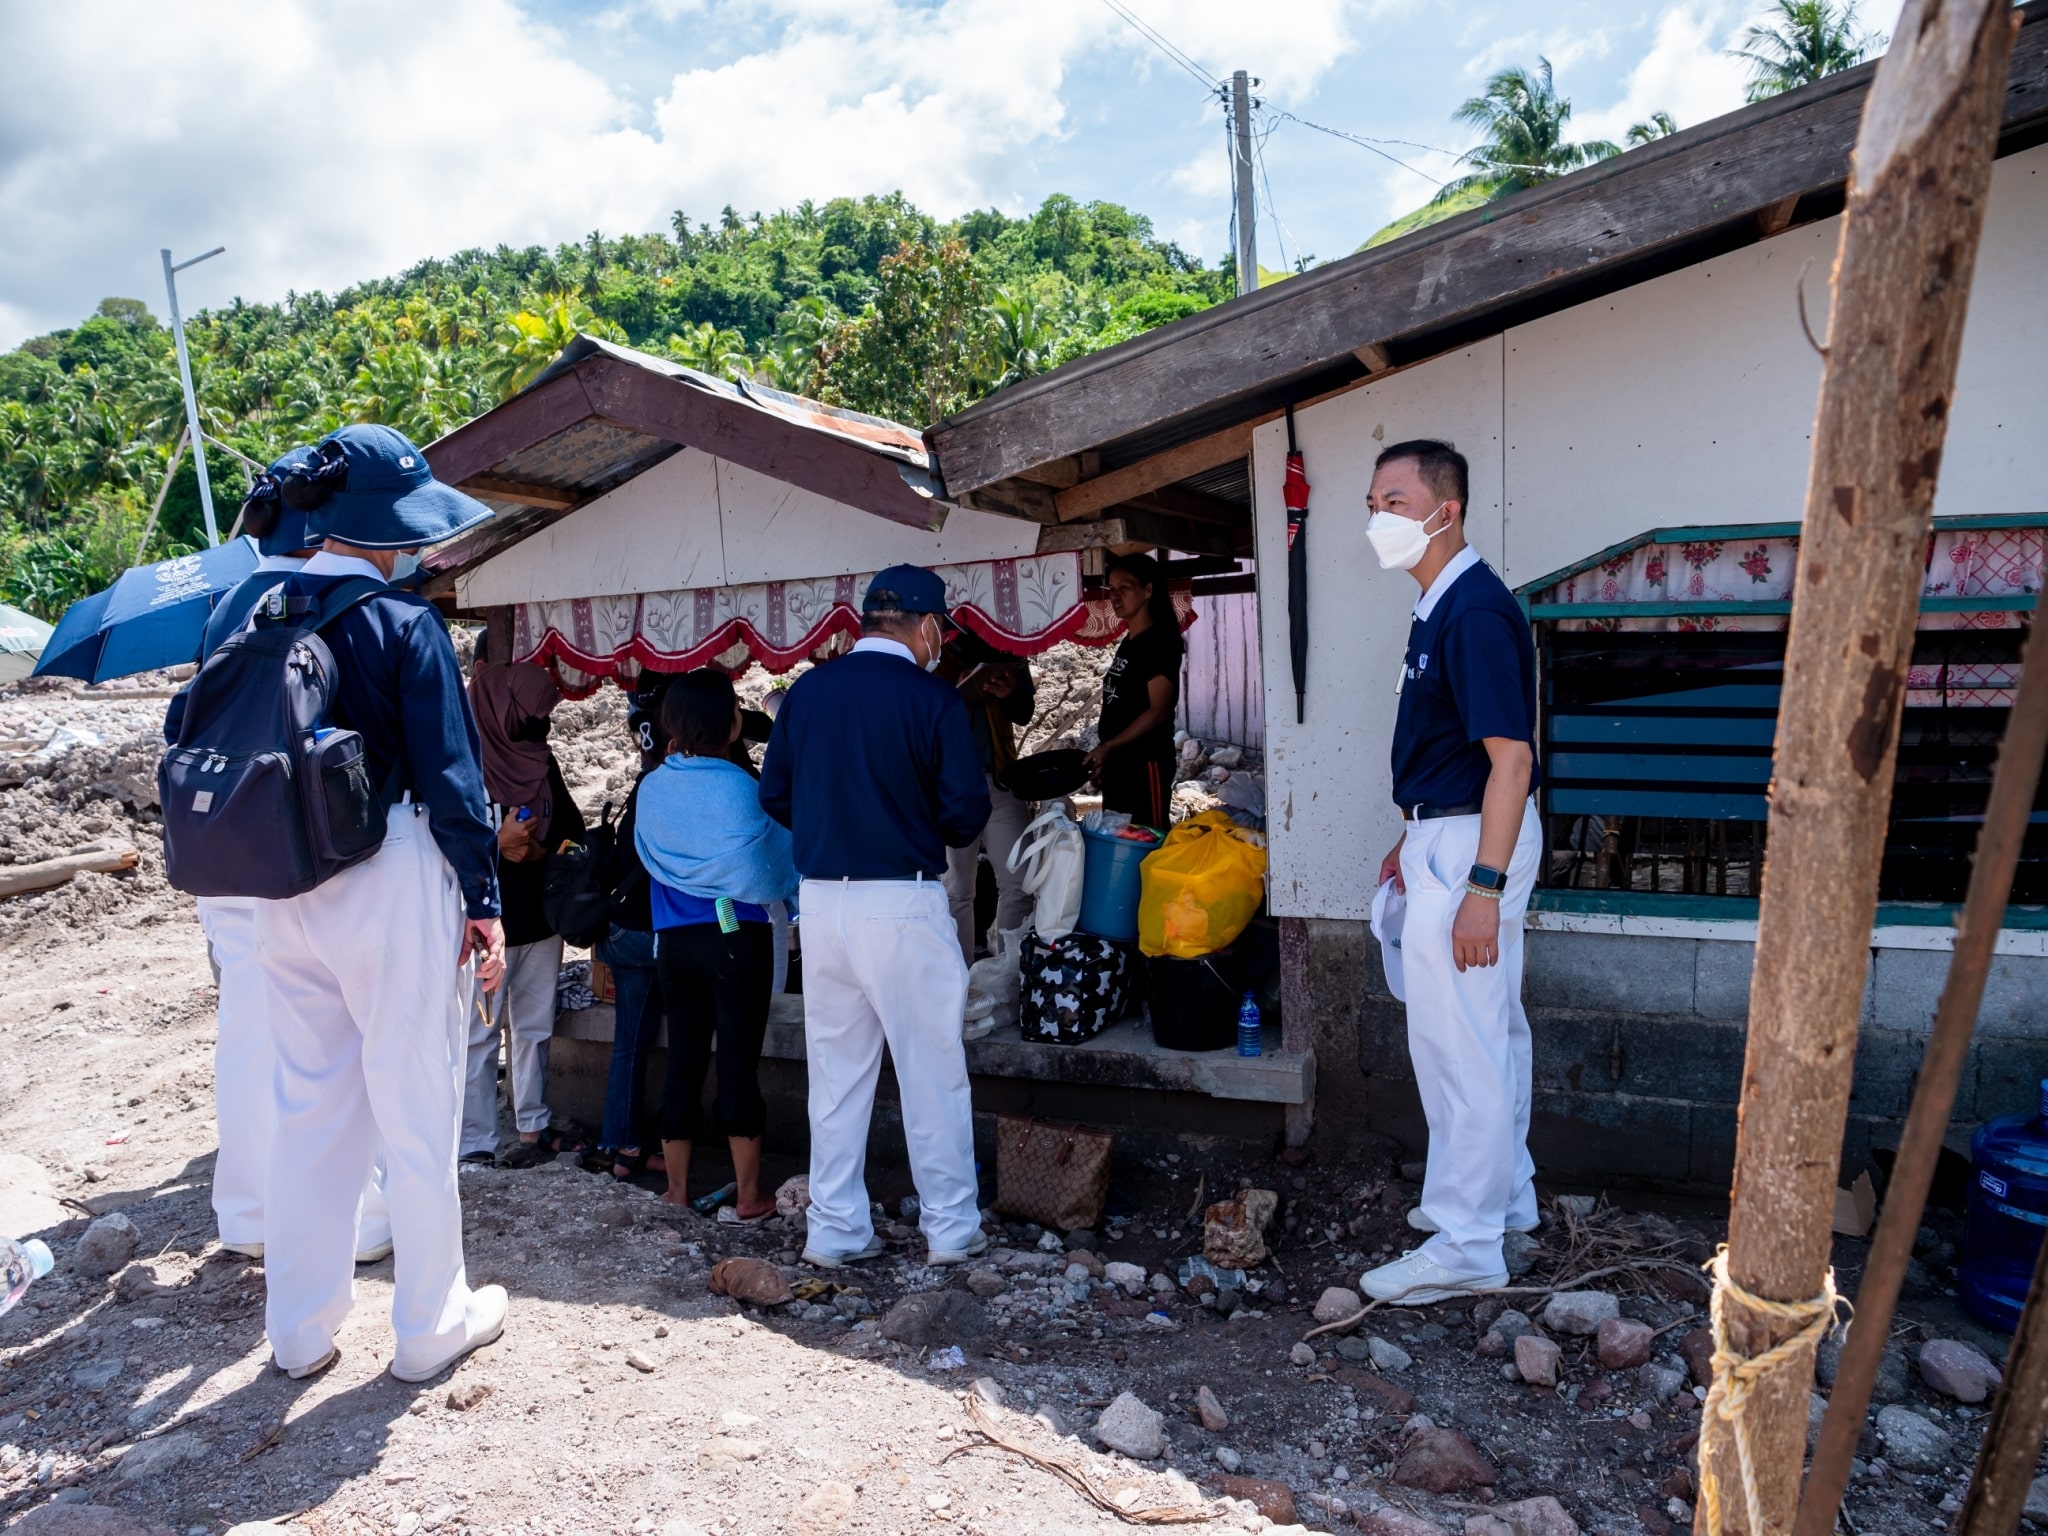 Tzu Chi volunteers survey the ‘ground zero’ of the tragic landslide that wiped out a Teduray indigenous community in Brgy. Kusiong. 【Photo by Daniel Lazar】